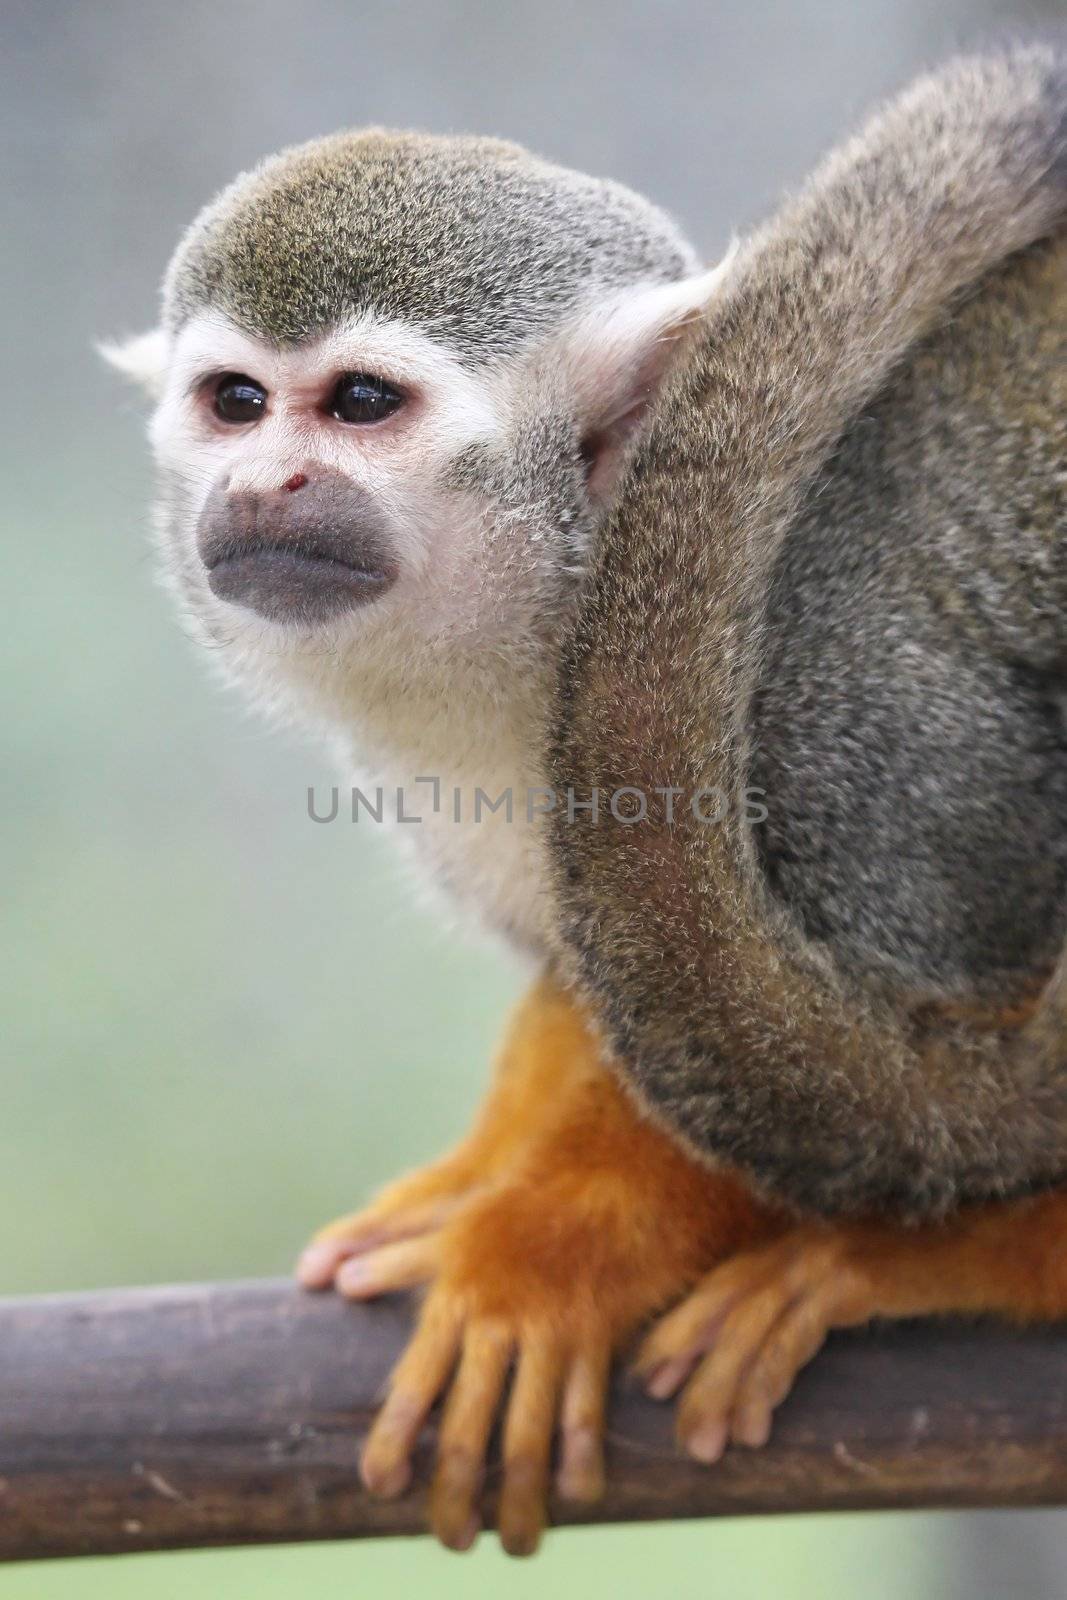 Cute squirrel monkey on a branch in a tree